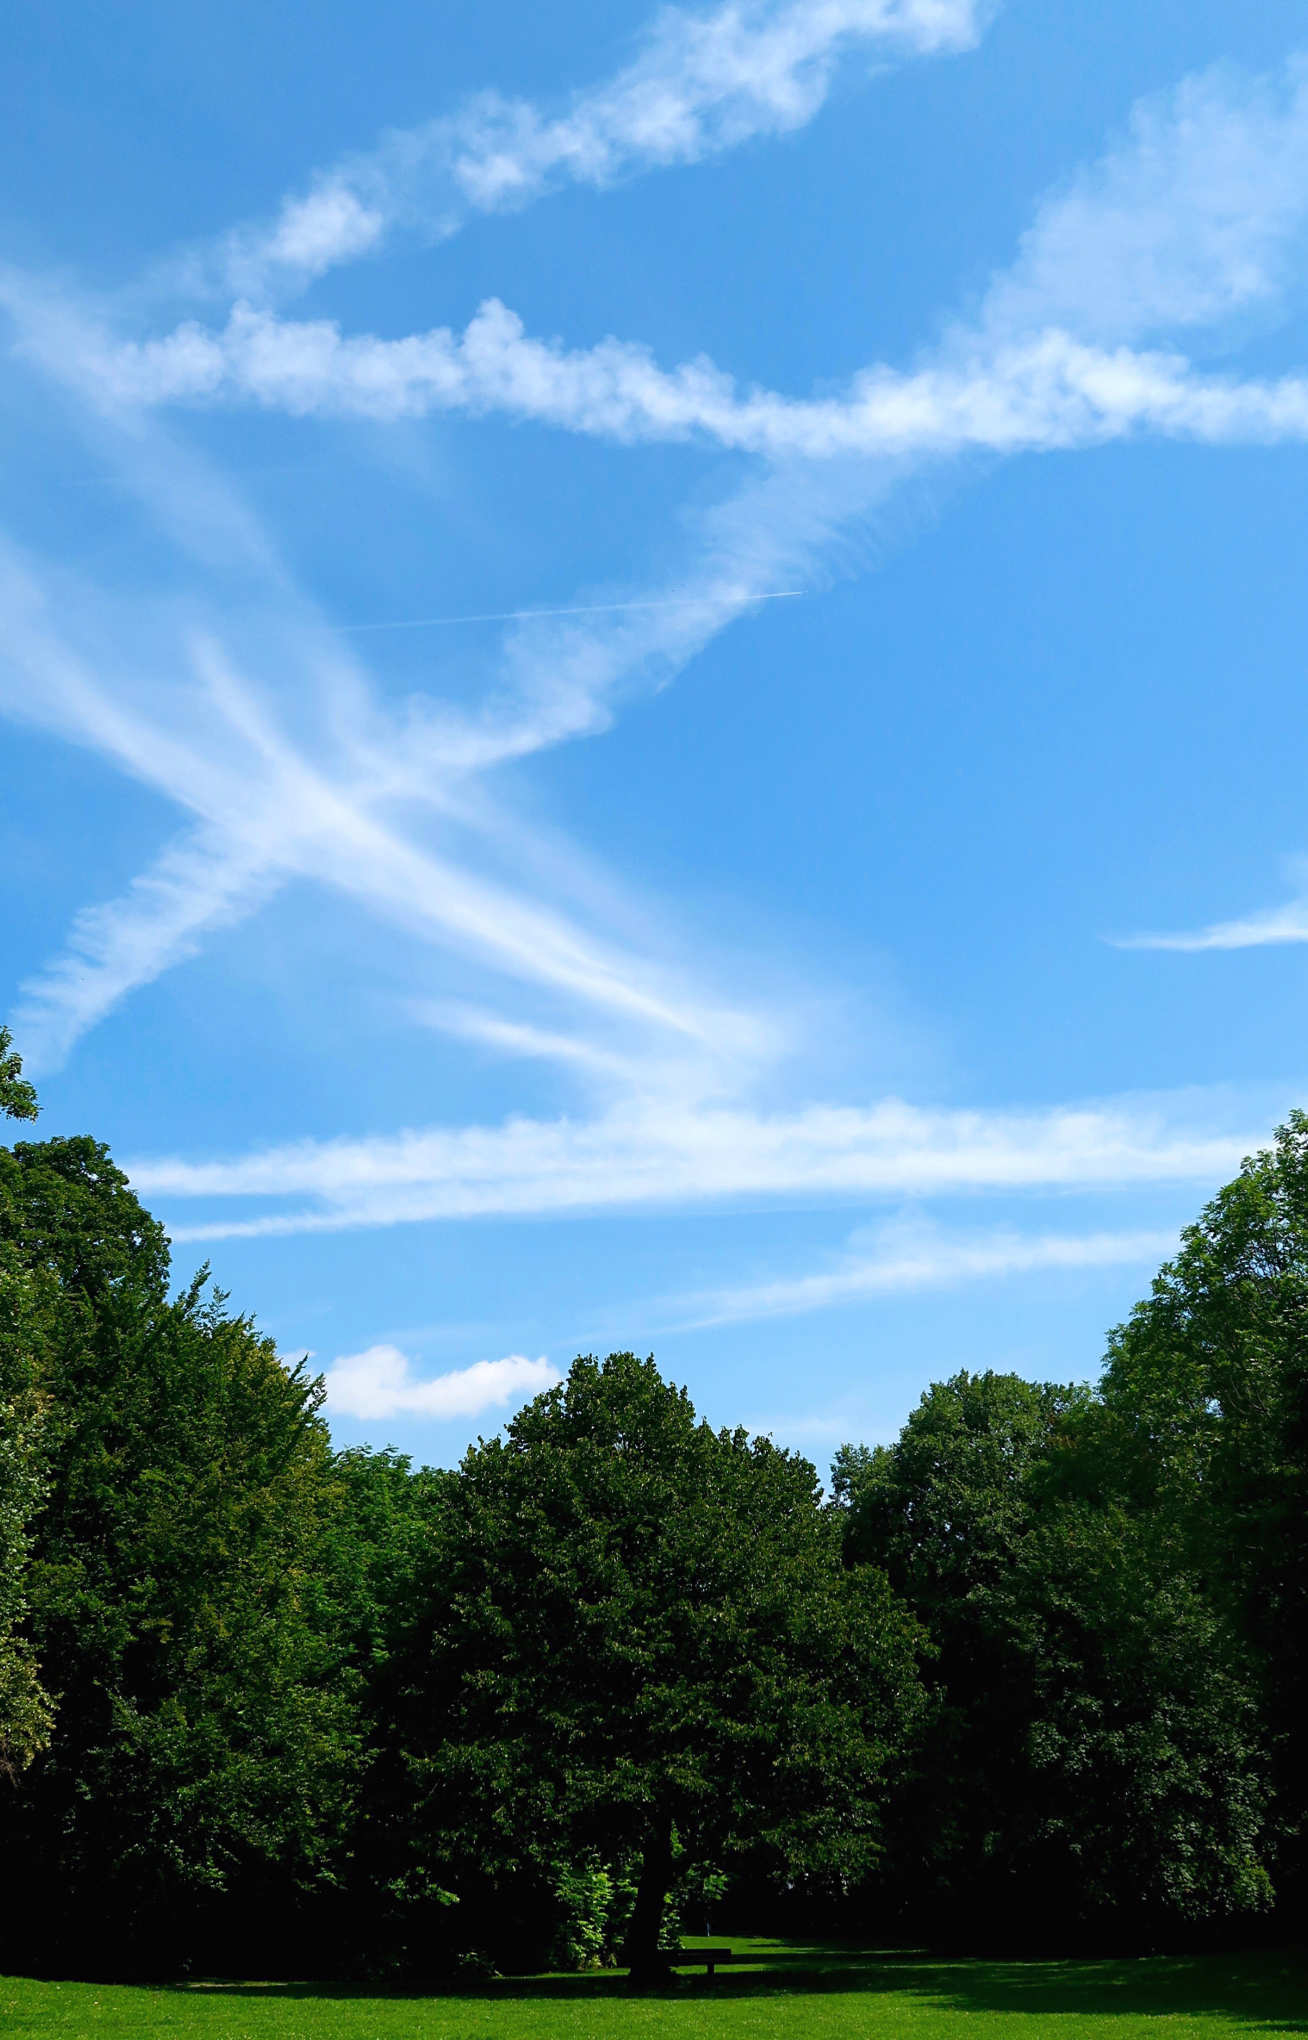 Photo of blue sky with several crisscrossing contrails. Trees seen in foreground.